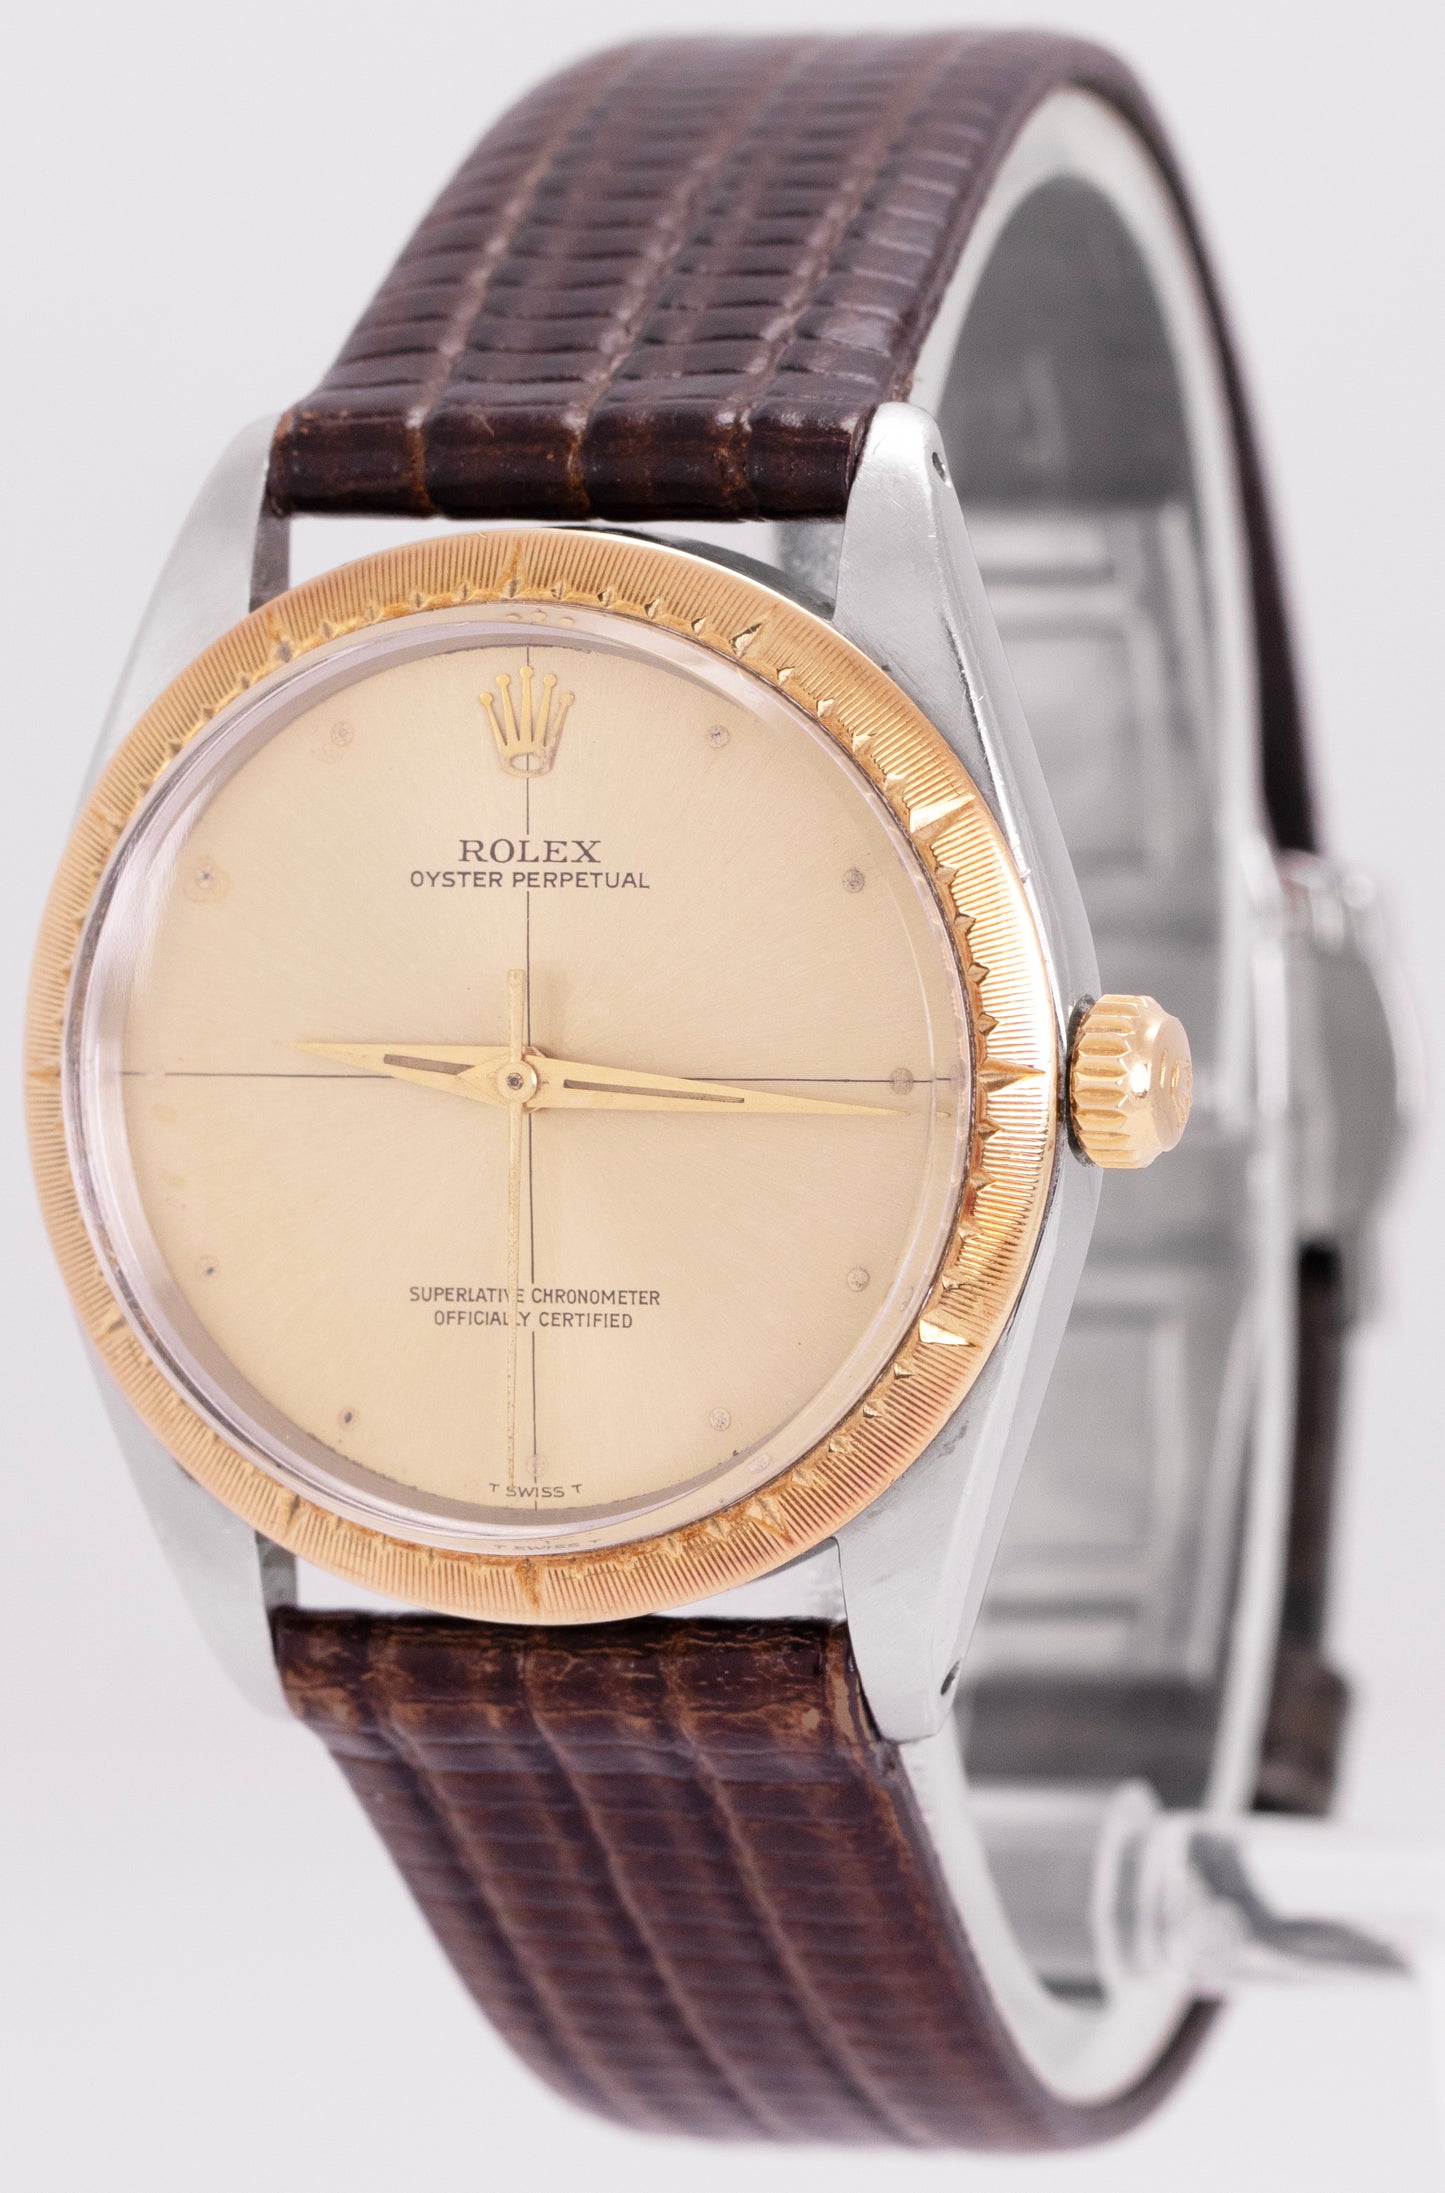 Vintage 1965 Rolex Oyster Perpetual Zephyr 34mm Two-Tone Champagne Watch 1008